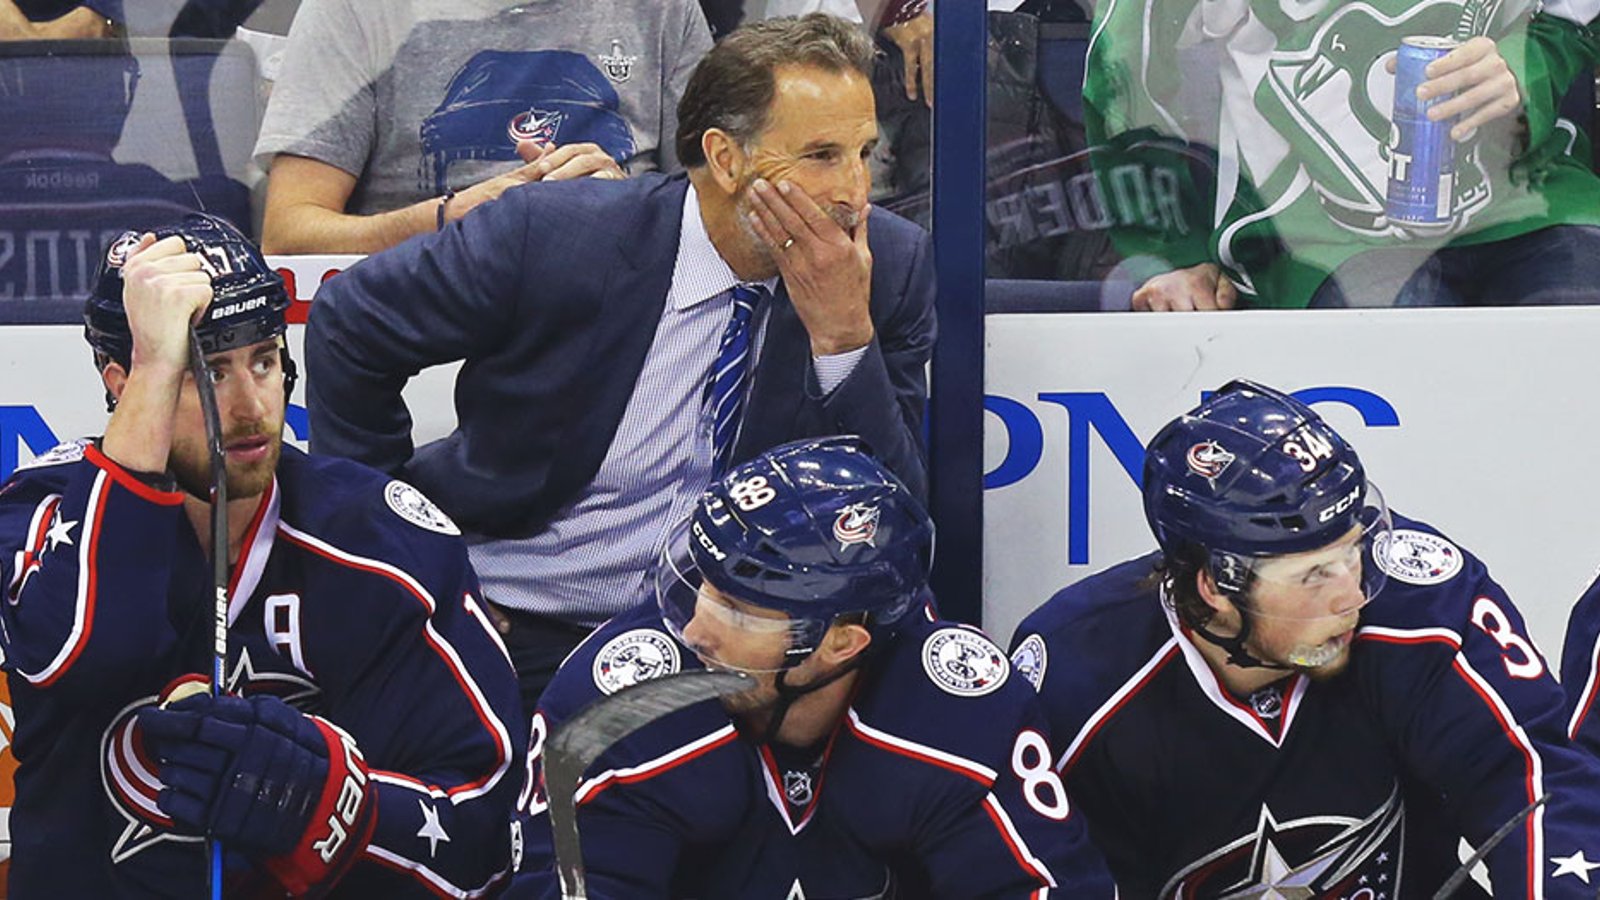 Report: Has Tortorella priced himself out of Columbus?